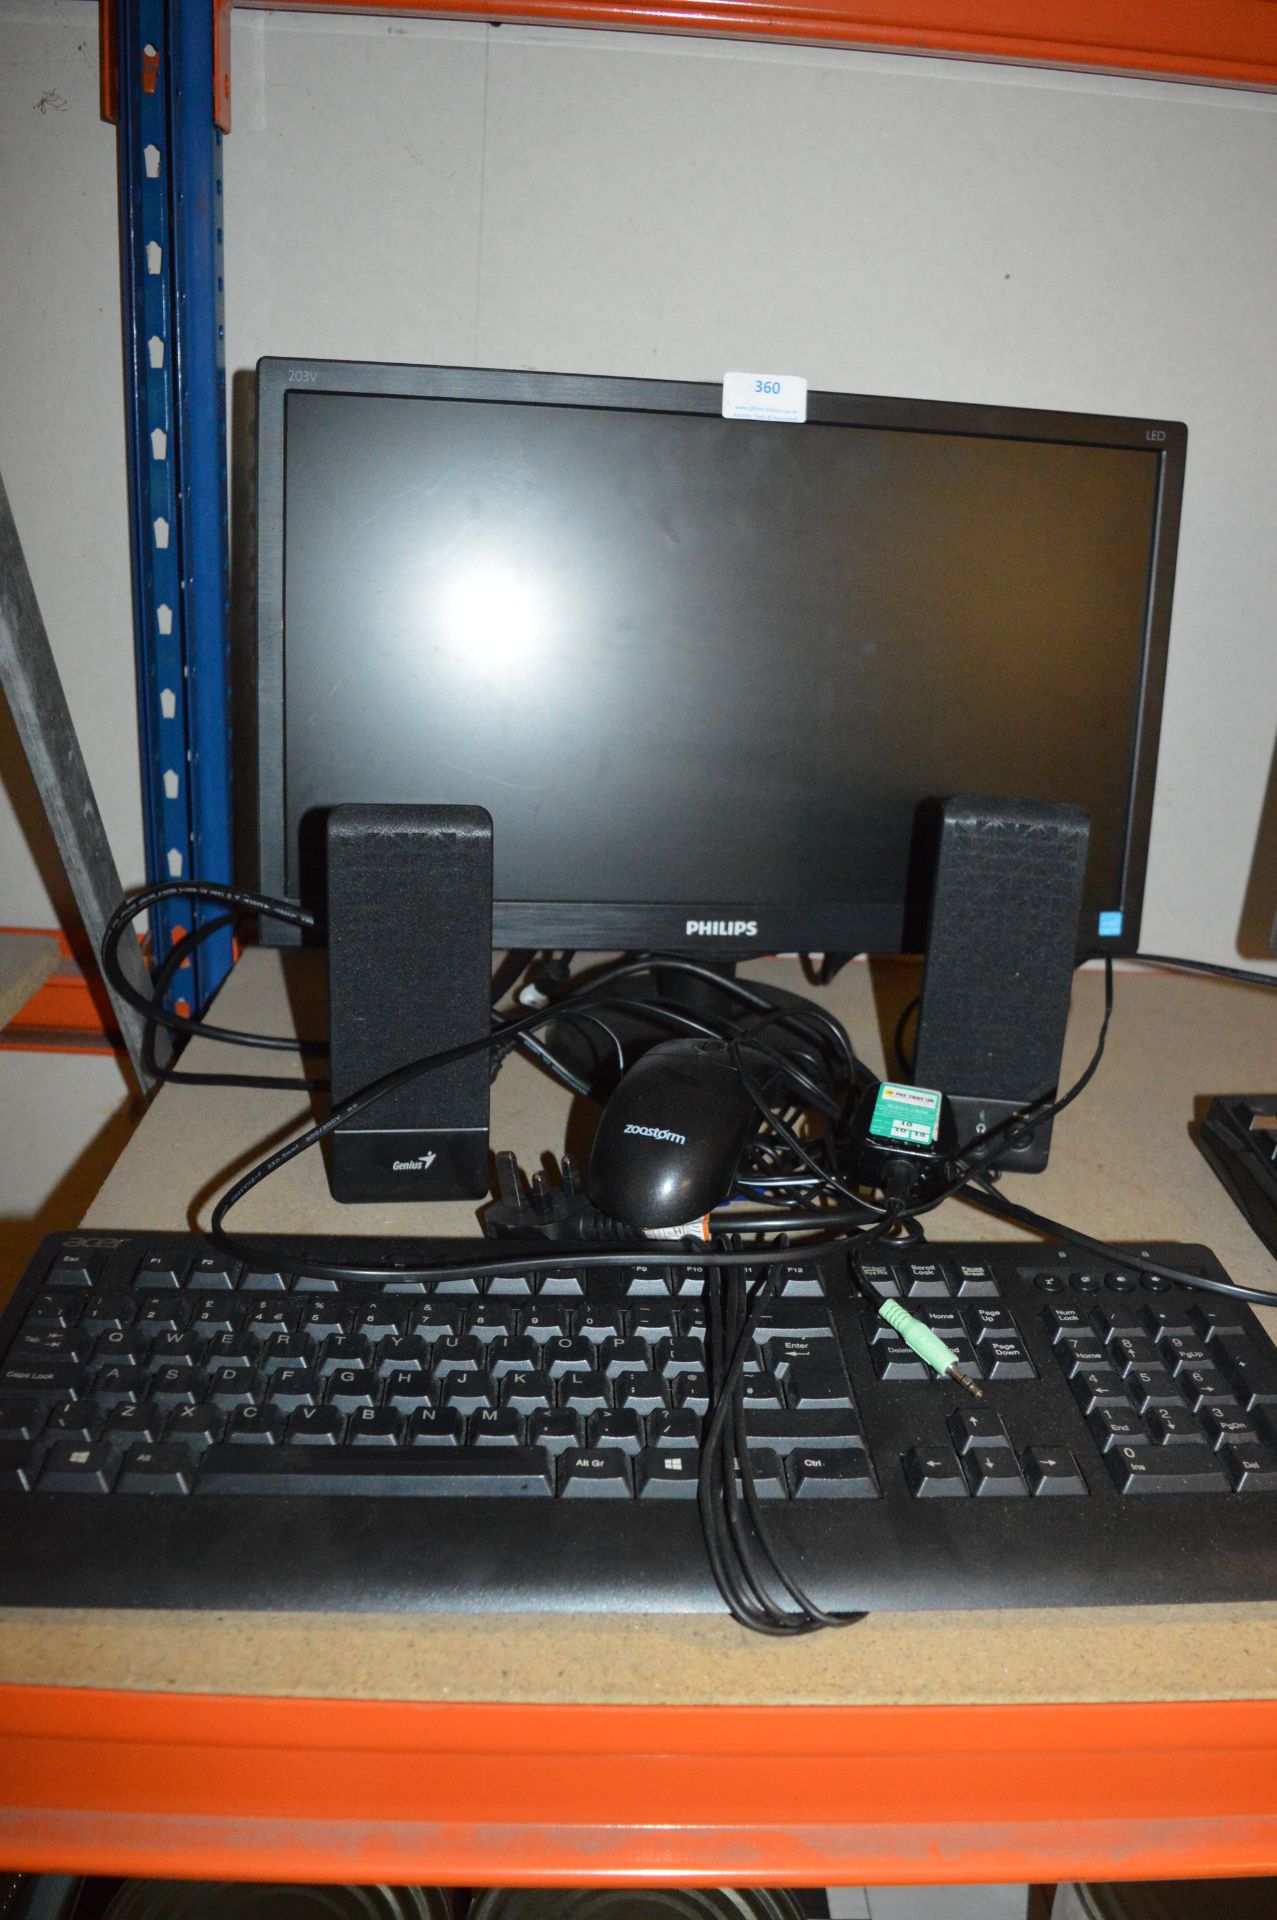 Philips Monitor plus Acer Keyboard, Mouse and Geni